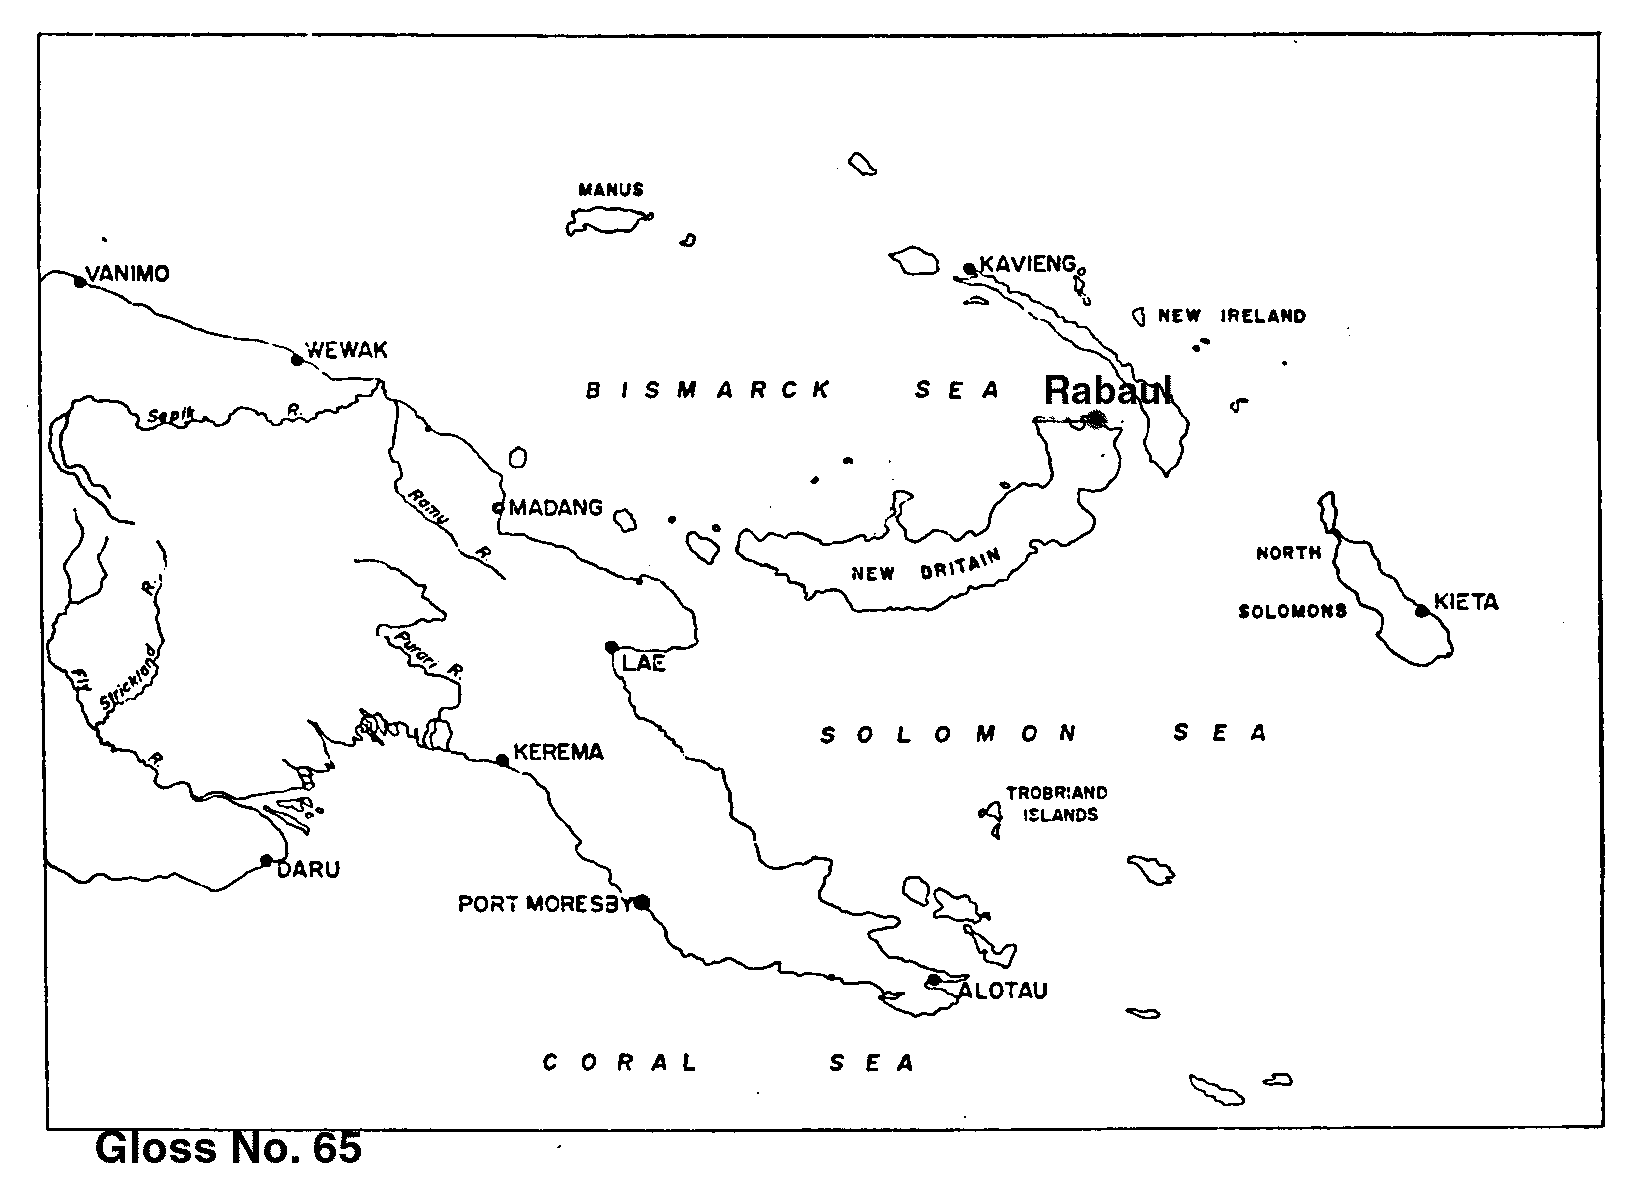 Location map for Rabaul, Papua New Guinea